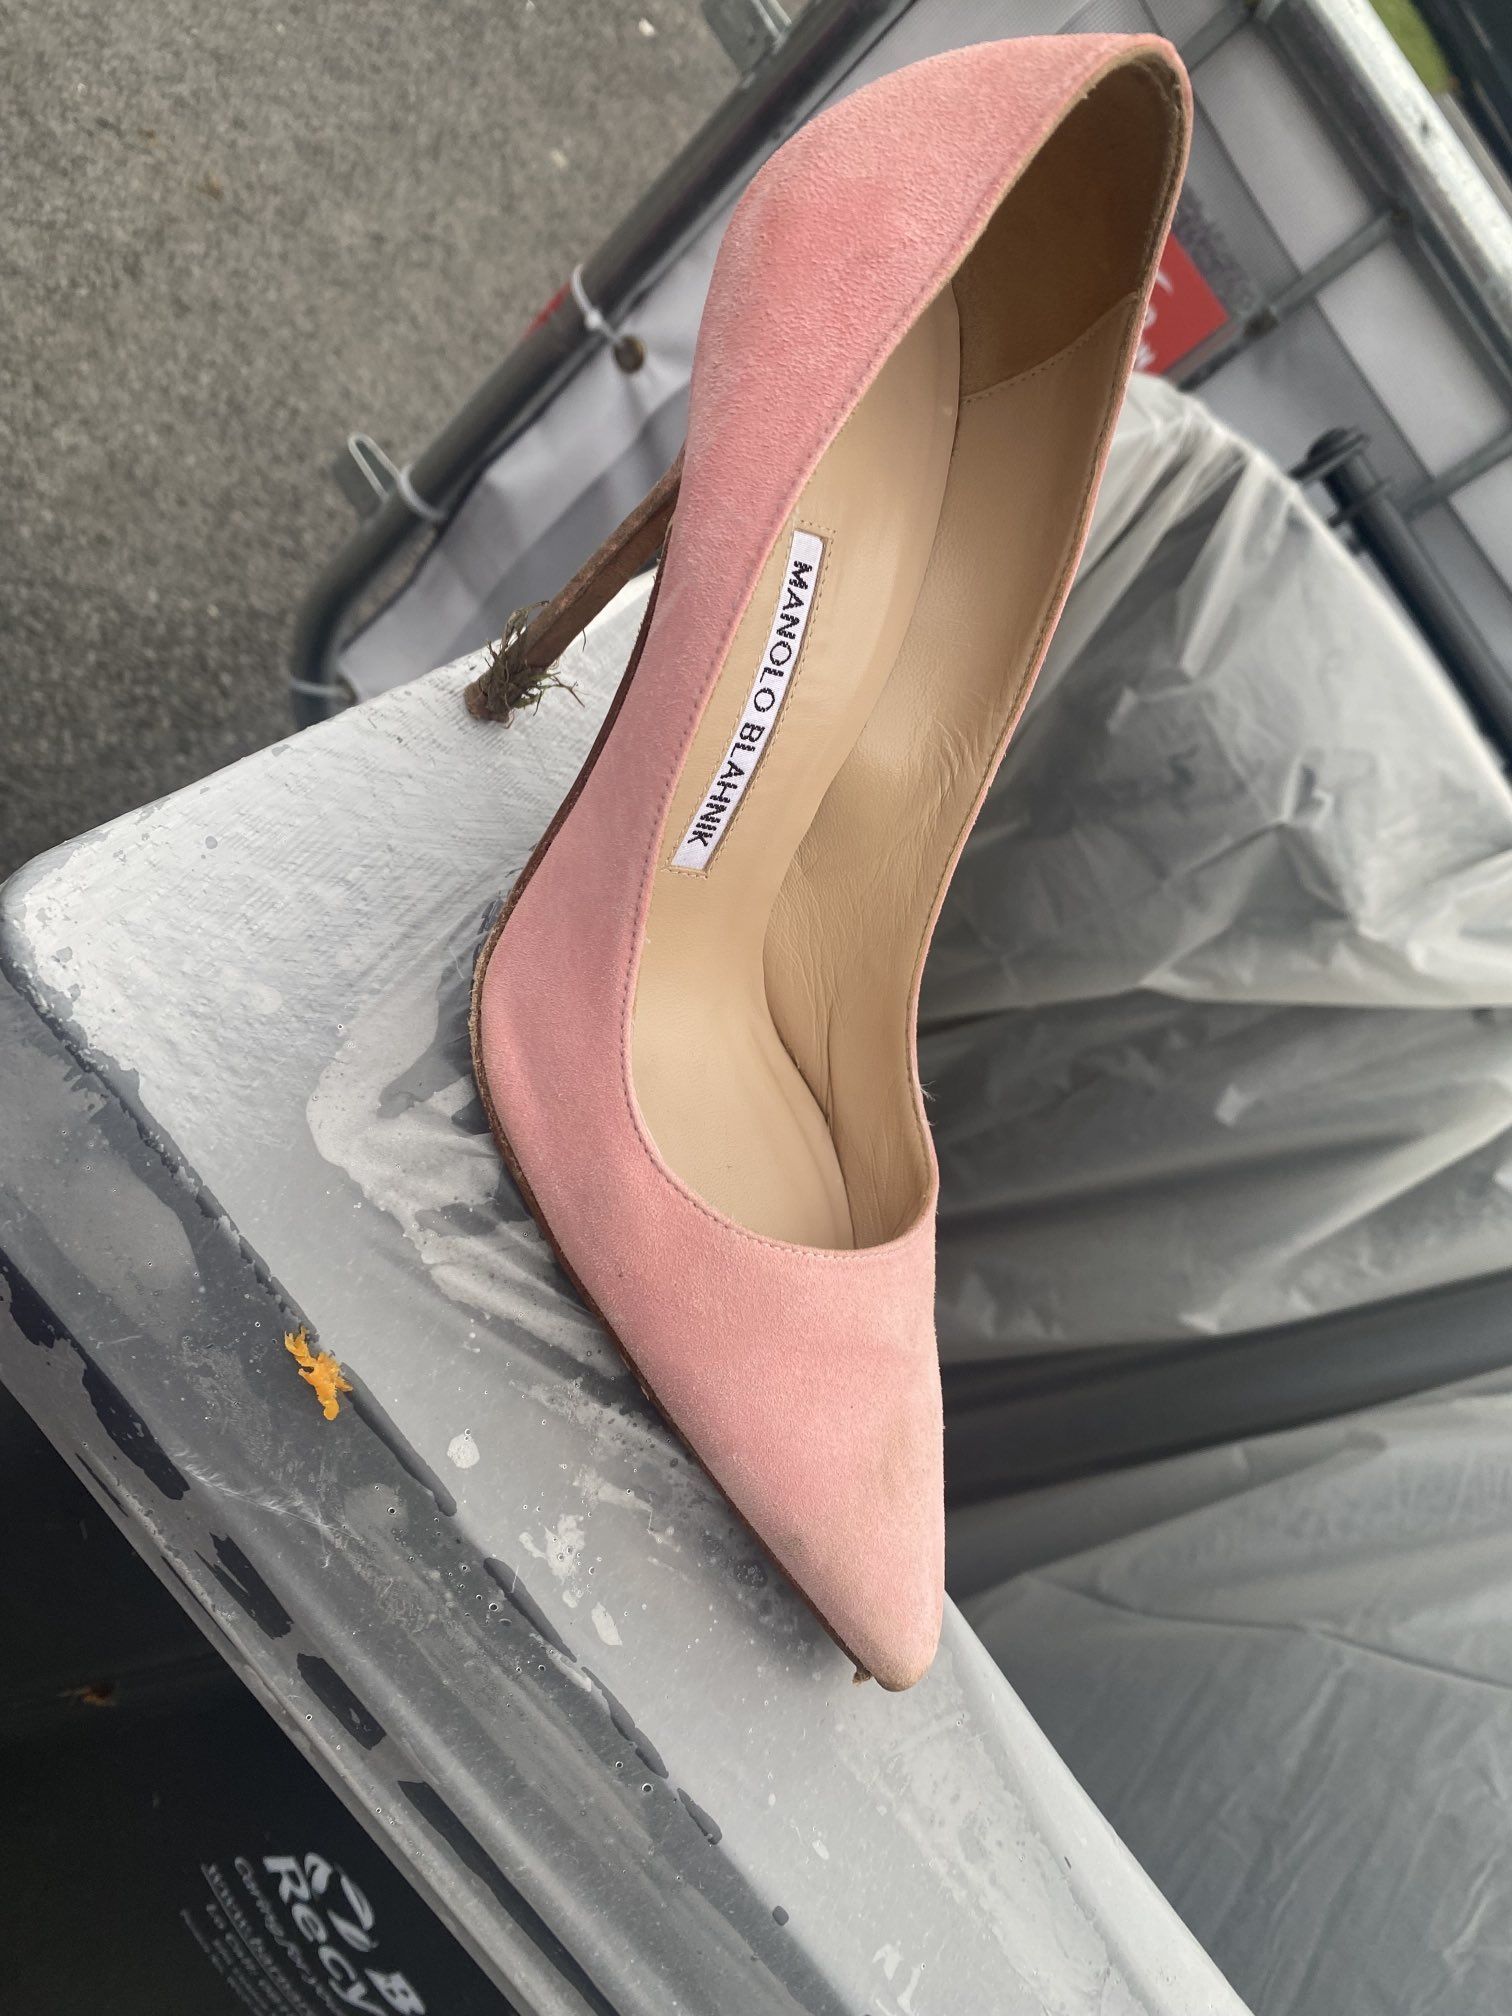 An Italian designer debuted a pair of heels reportedly worth $20